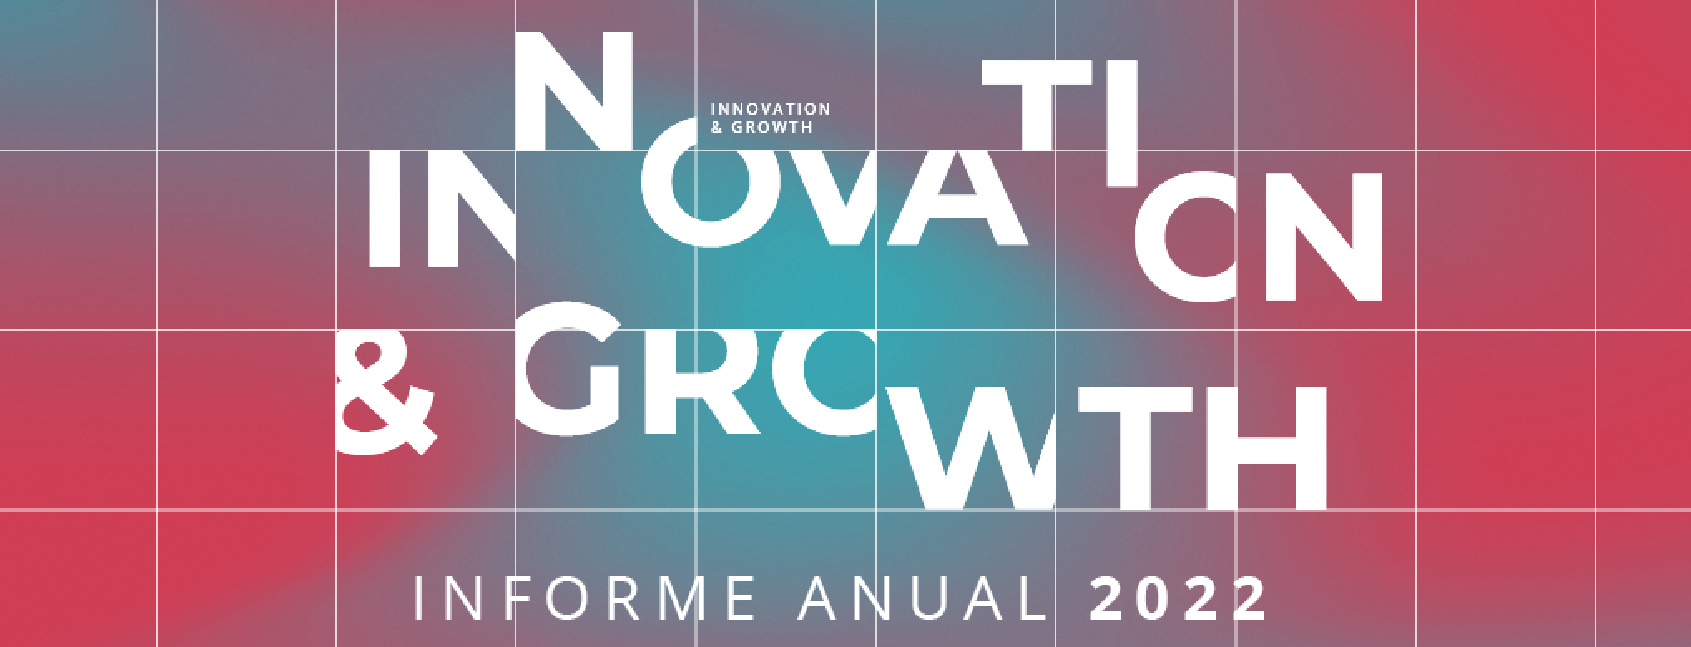 LLYC presents “Innovation & Growth”, the company’s 2022 Annual Report